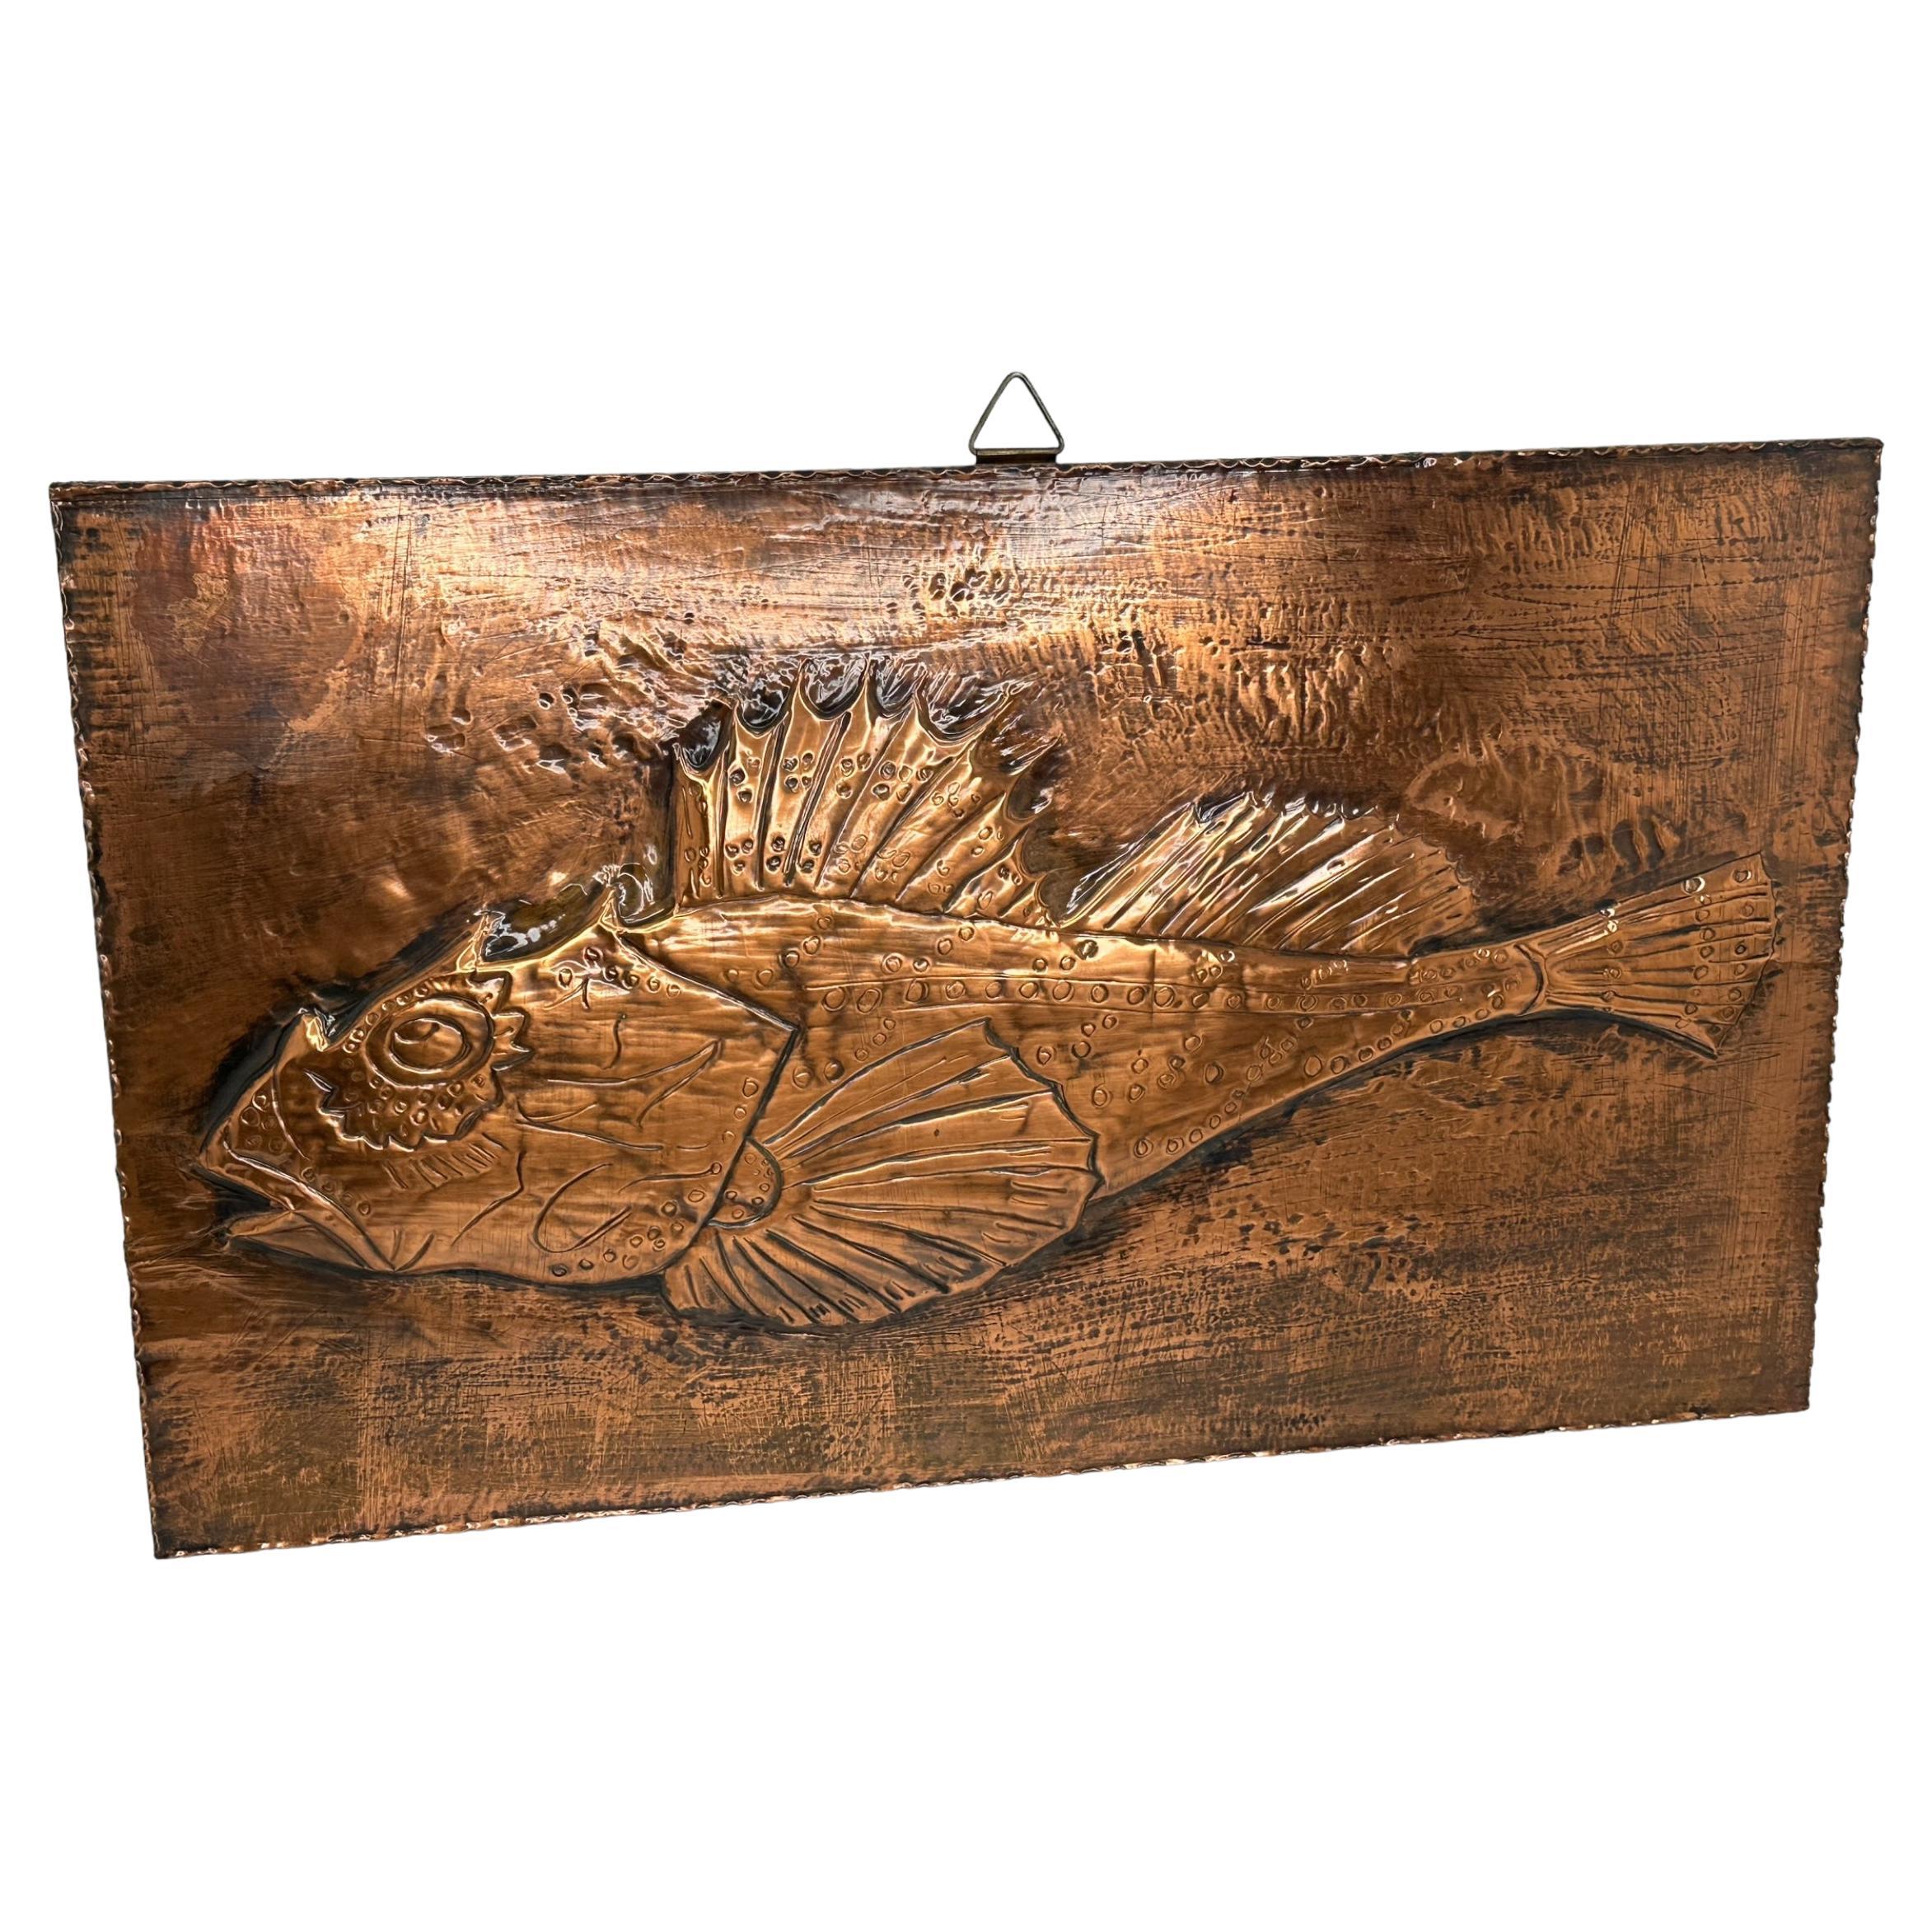 Fossil Bonefish Fish Copper Wall Decoration Wall Panel Picture Vintage, 1970s